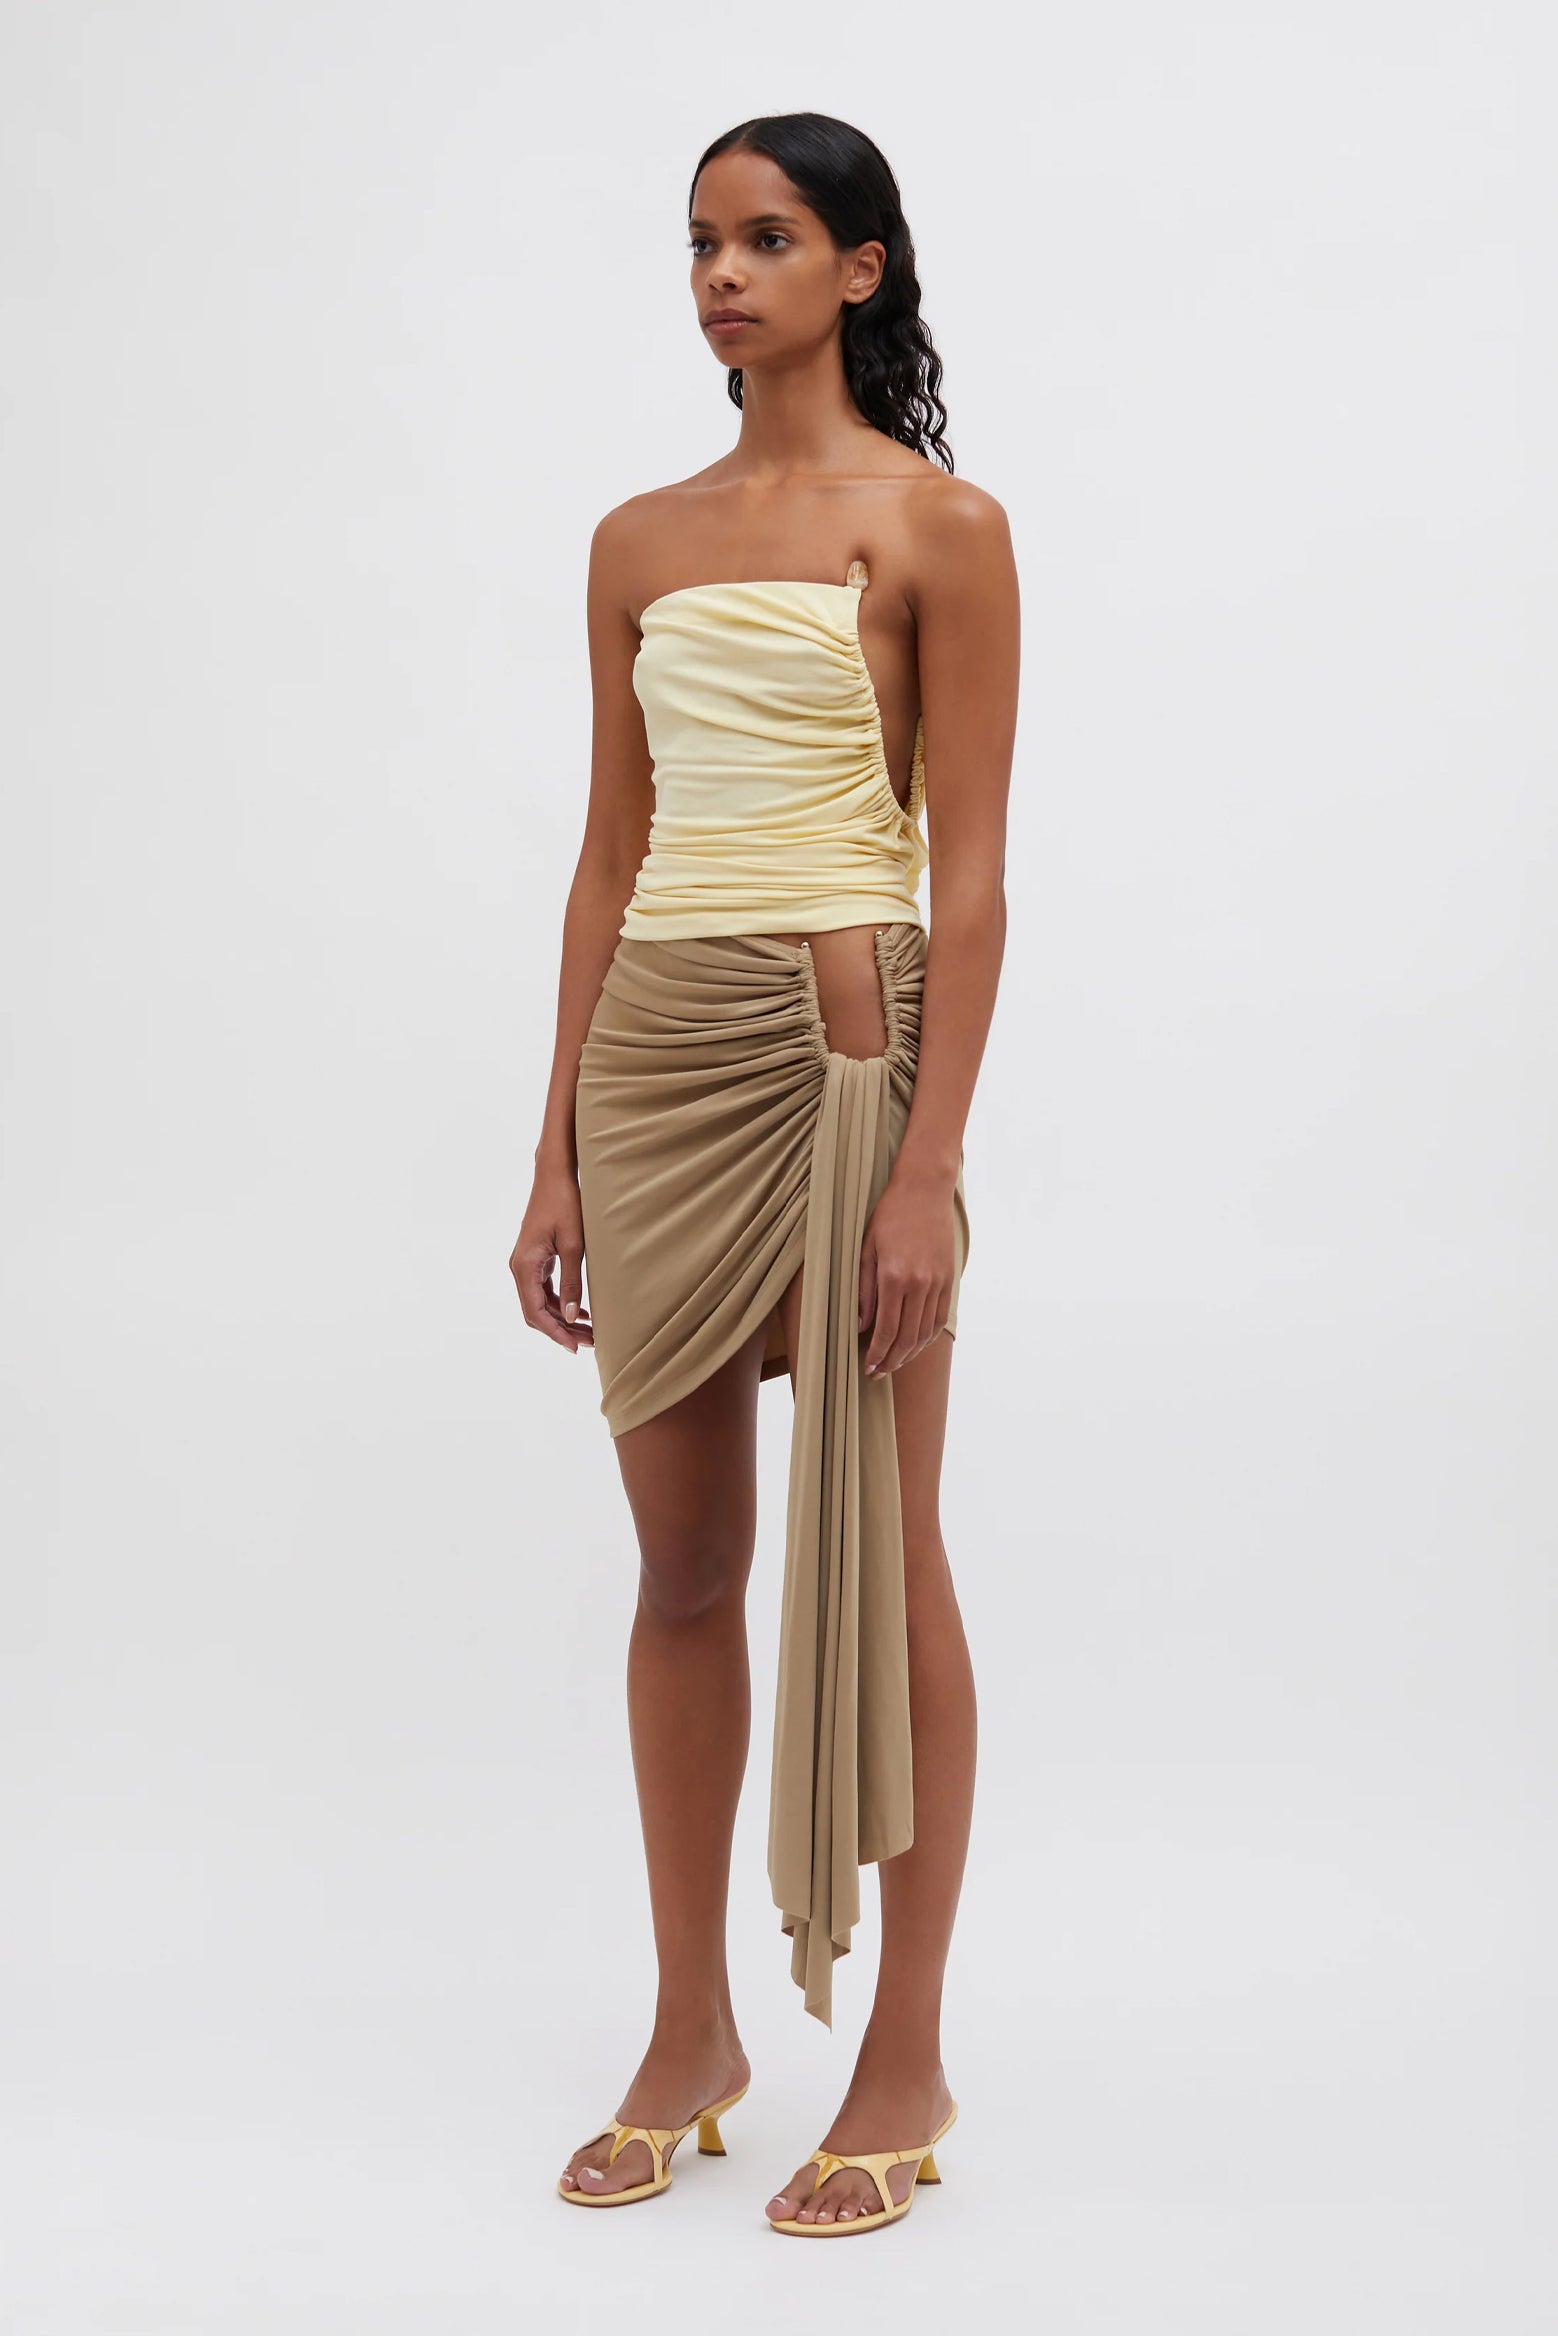 Christopher Esber Odessa Arced Side Bustier in Butter available at The New Trend Australia.